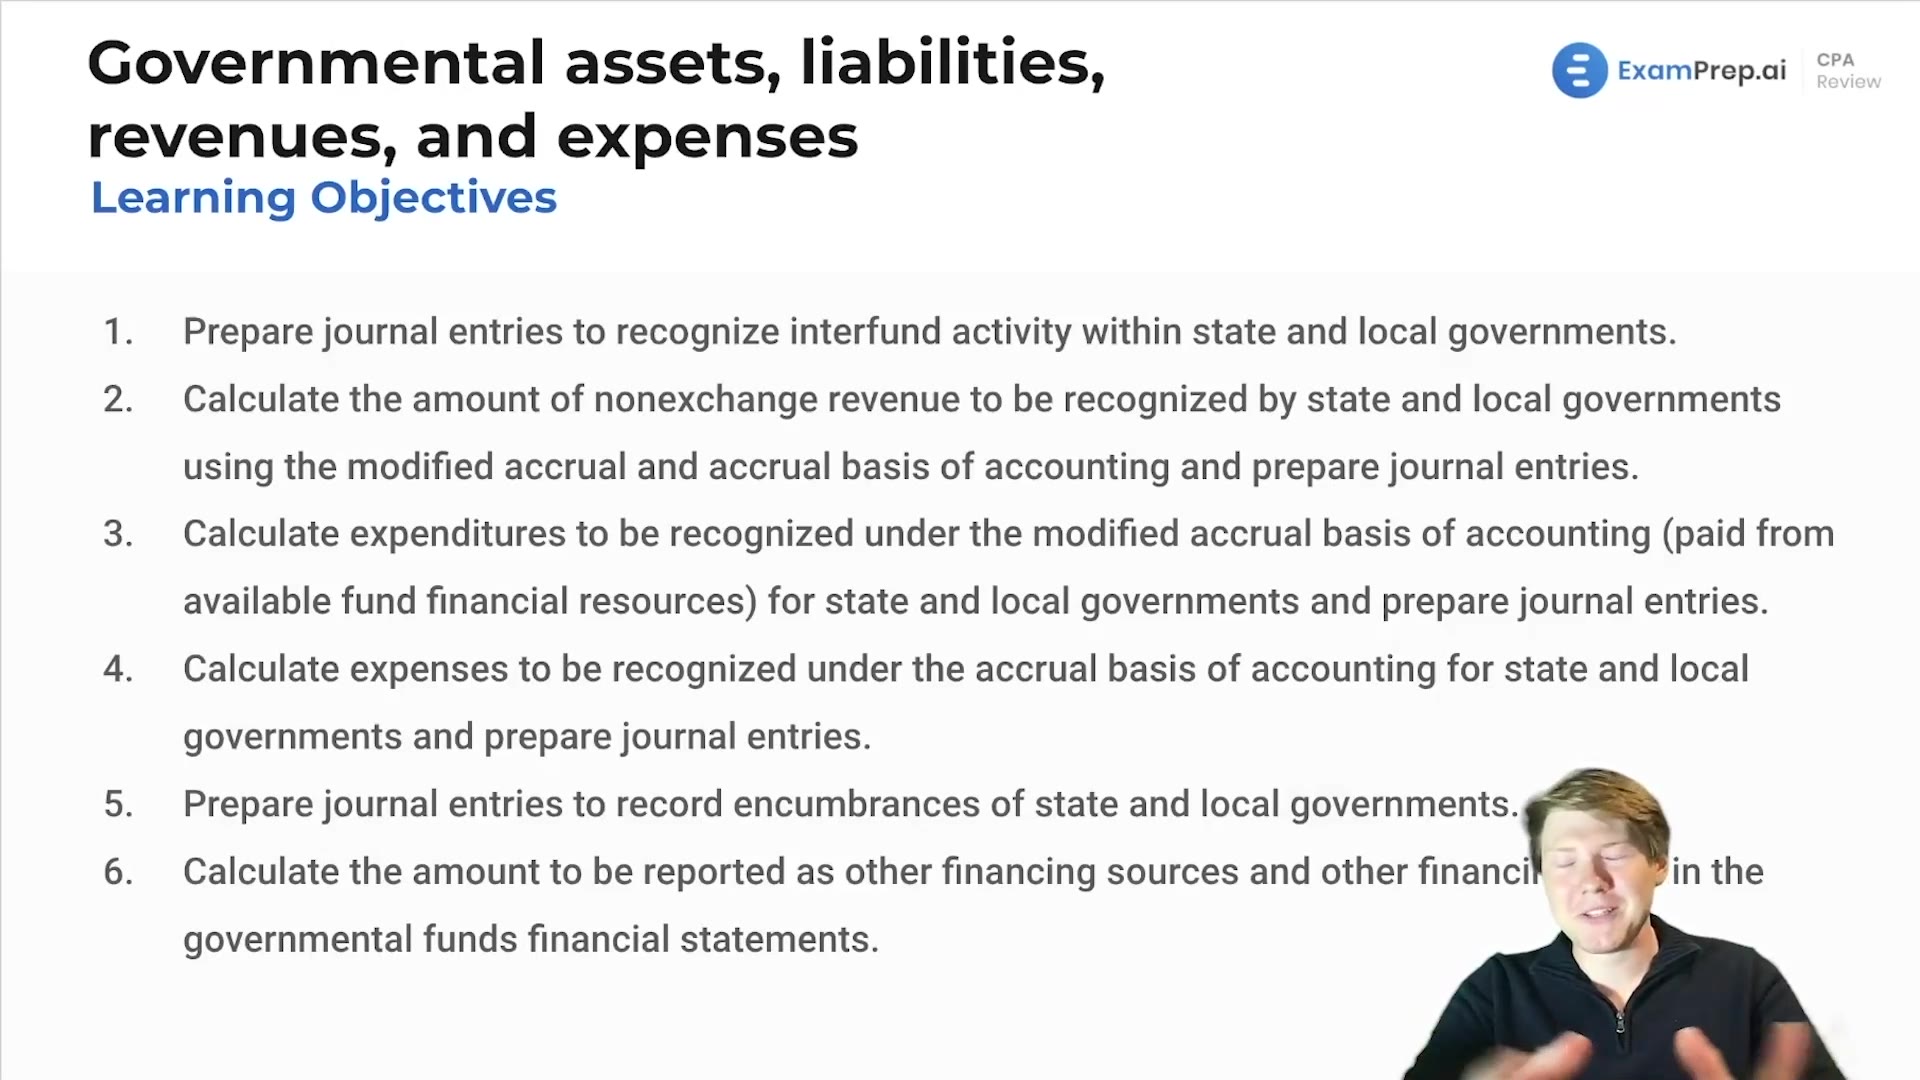 Governmental Assets, Liabilities, Revenues & Expenses Overview and Objectives lesson thumbnail